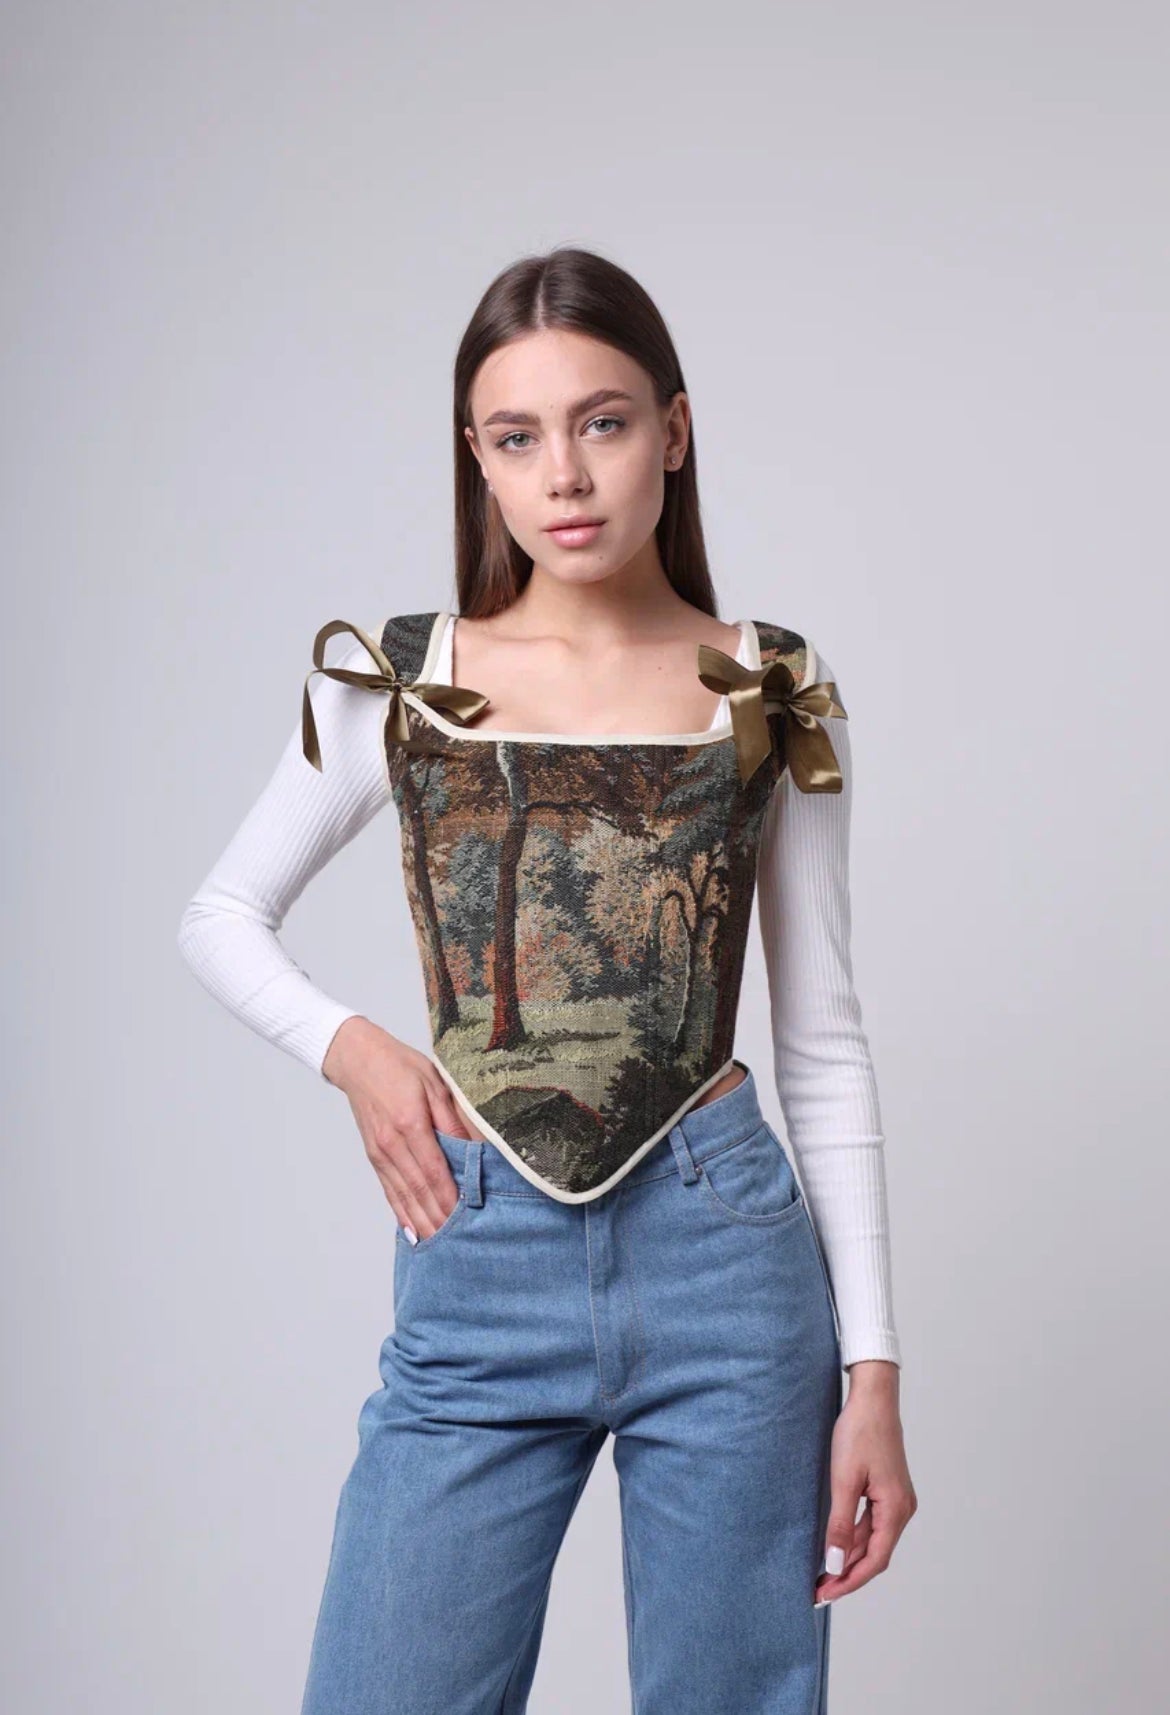 NEW Lace-up Vintage Tapestry Corset Top, "Scenic Woods” Print, Size XS-S (US 0-4)